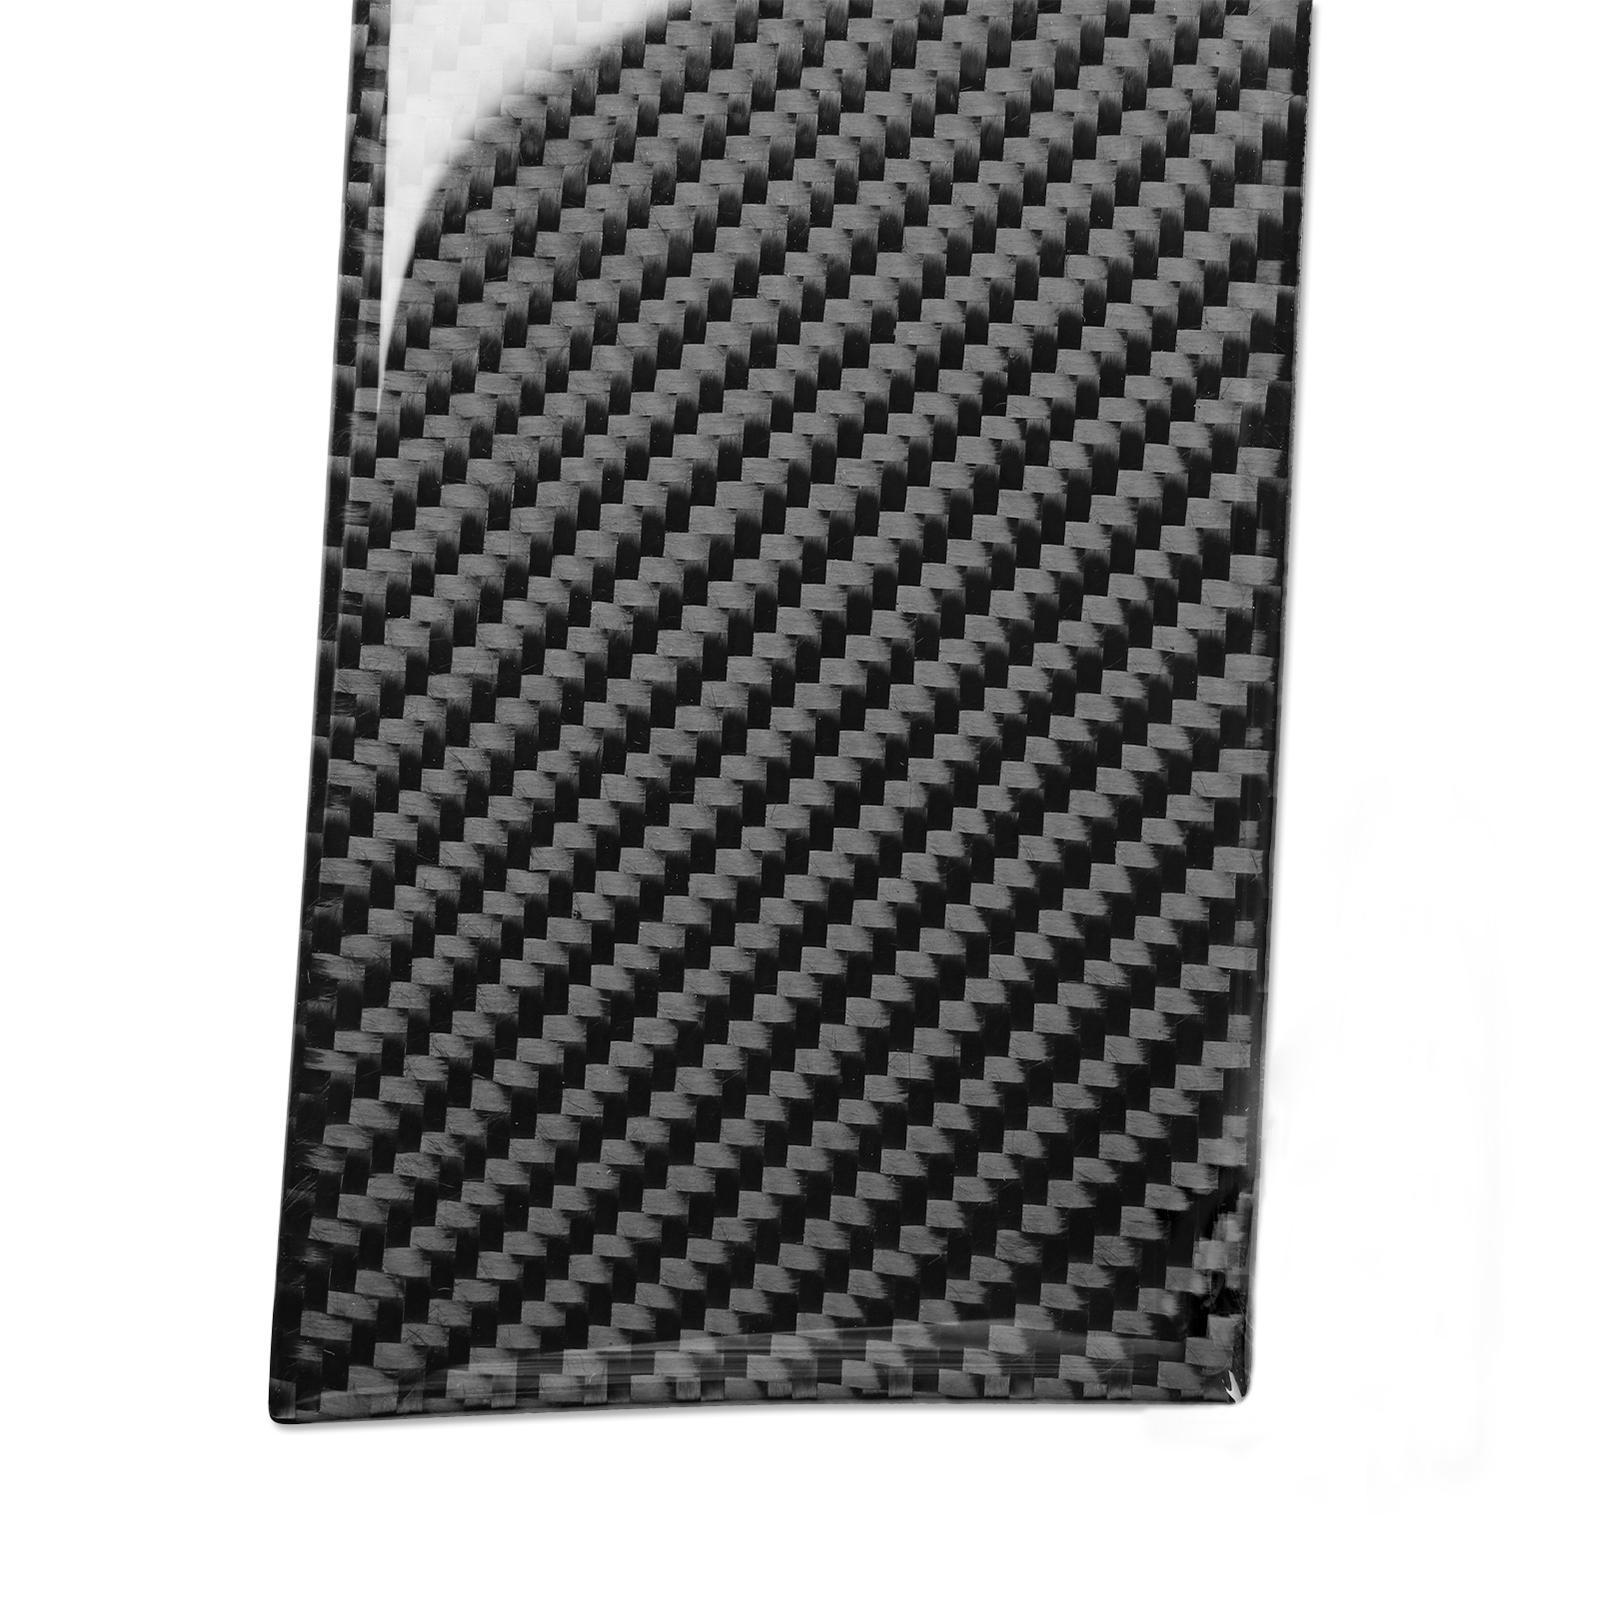 Interior Center Radio Control Cover Replacement Carbon Fiber Inner Accessories for Easy Installation High Performance